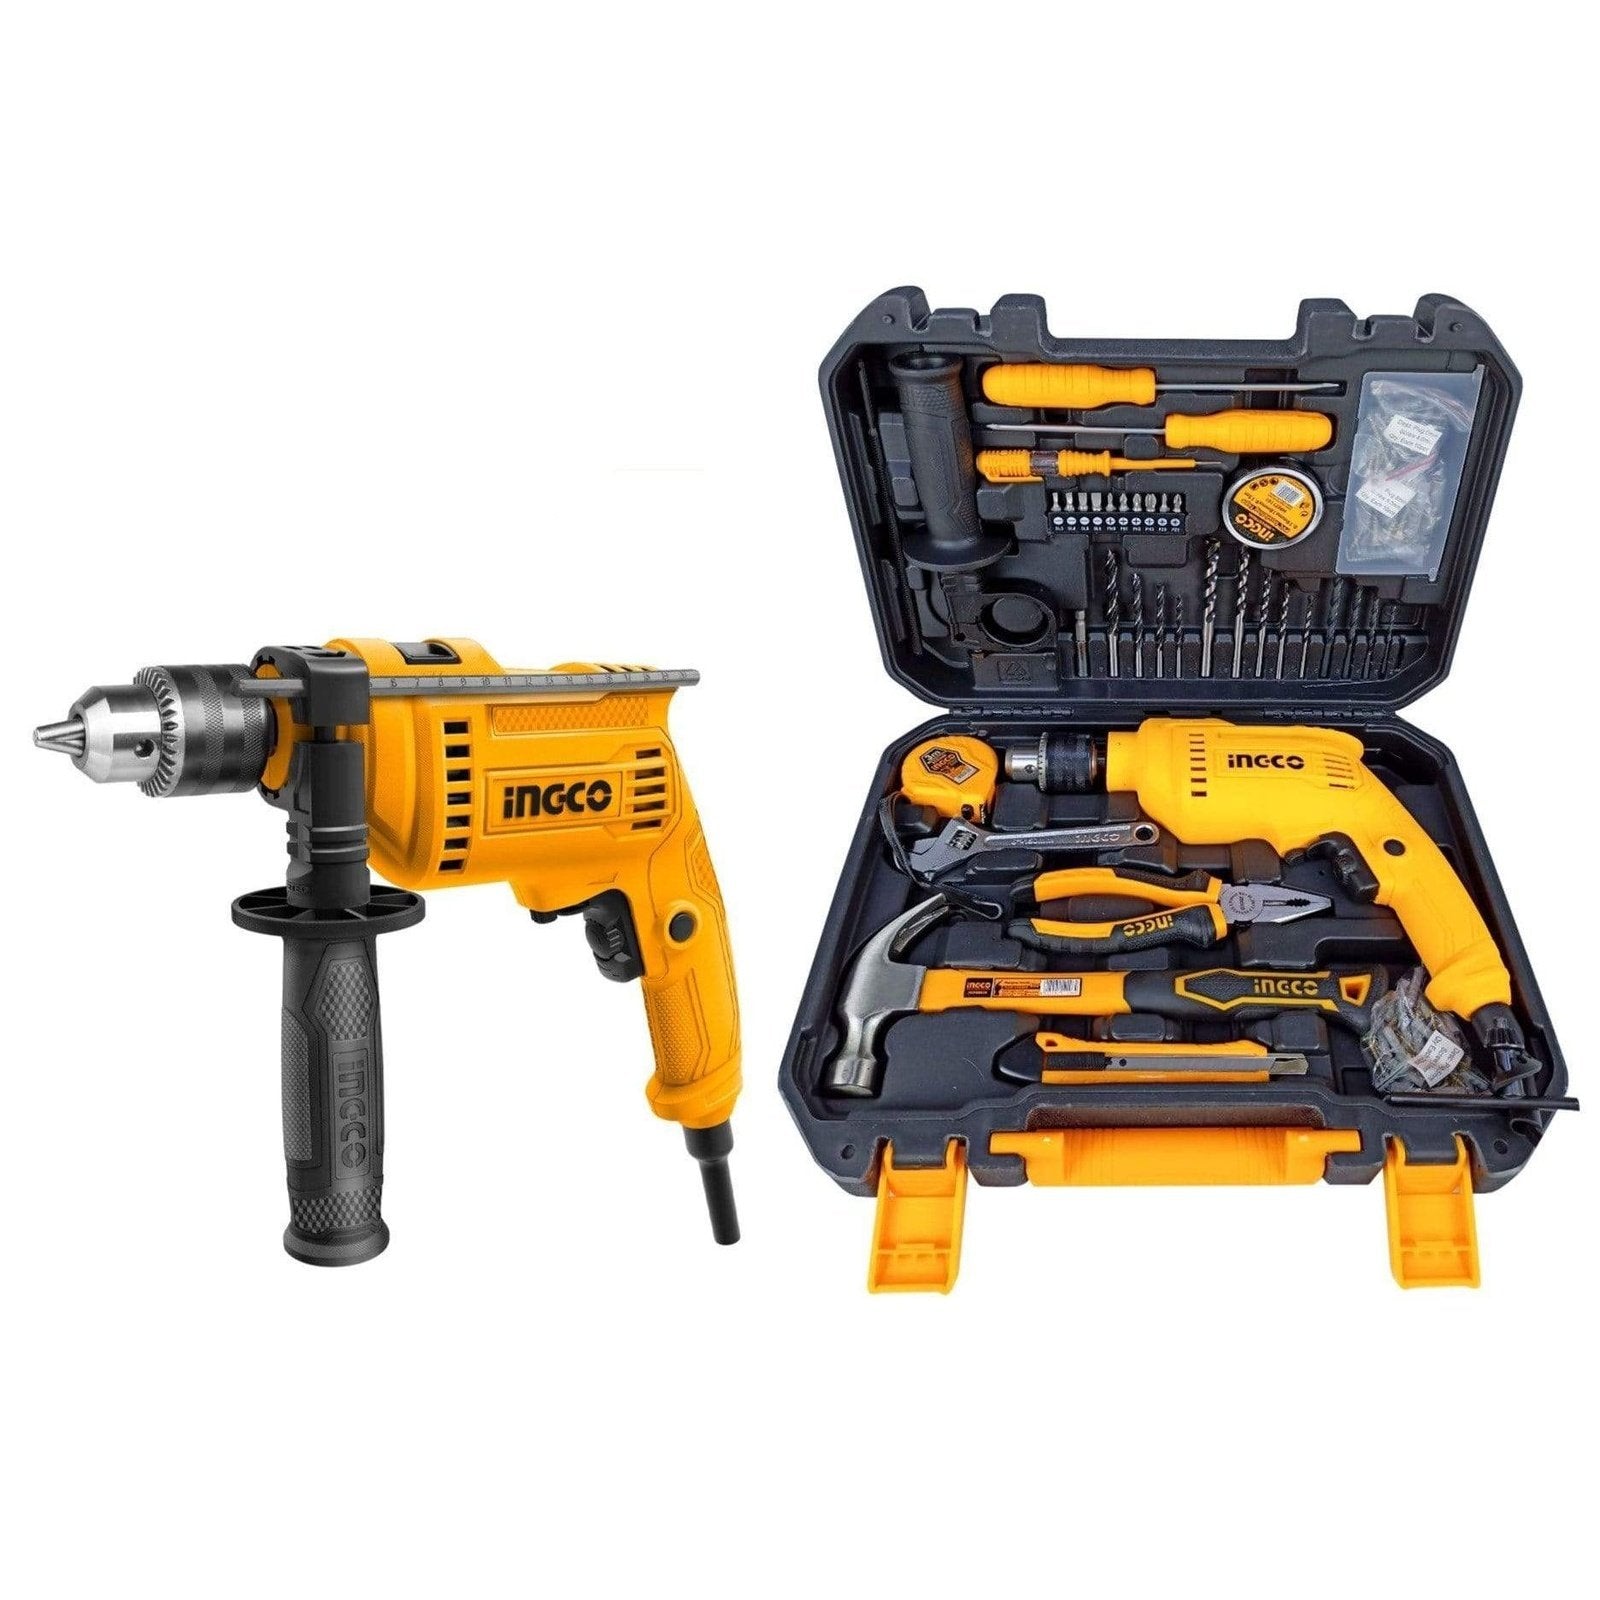 Ingco 115 Pieces Tools Set with 680W Hammer Impact Drill - HKTHP11151 | Supply Master | Accra, Ghana Tools Building Steel Engineering Hardware tool